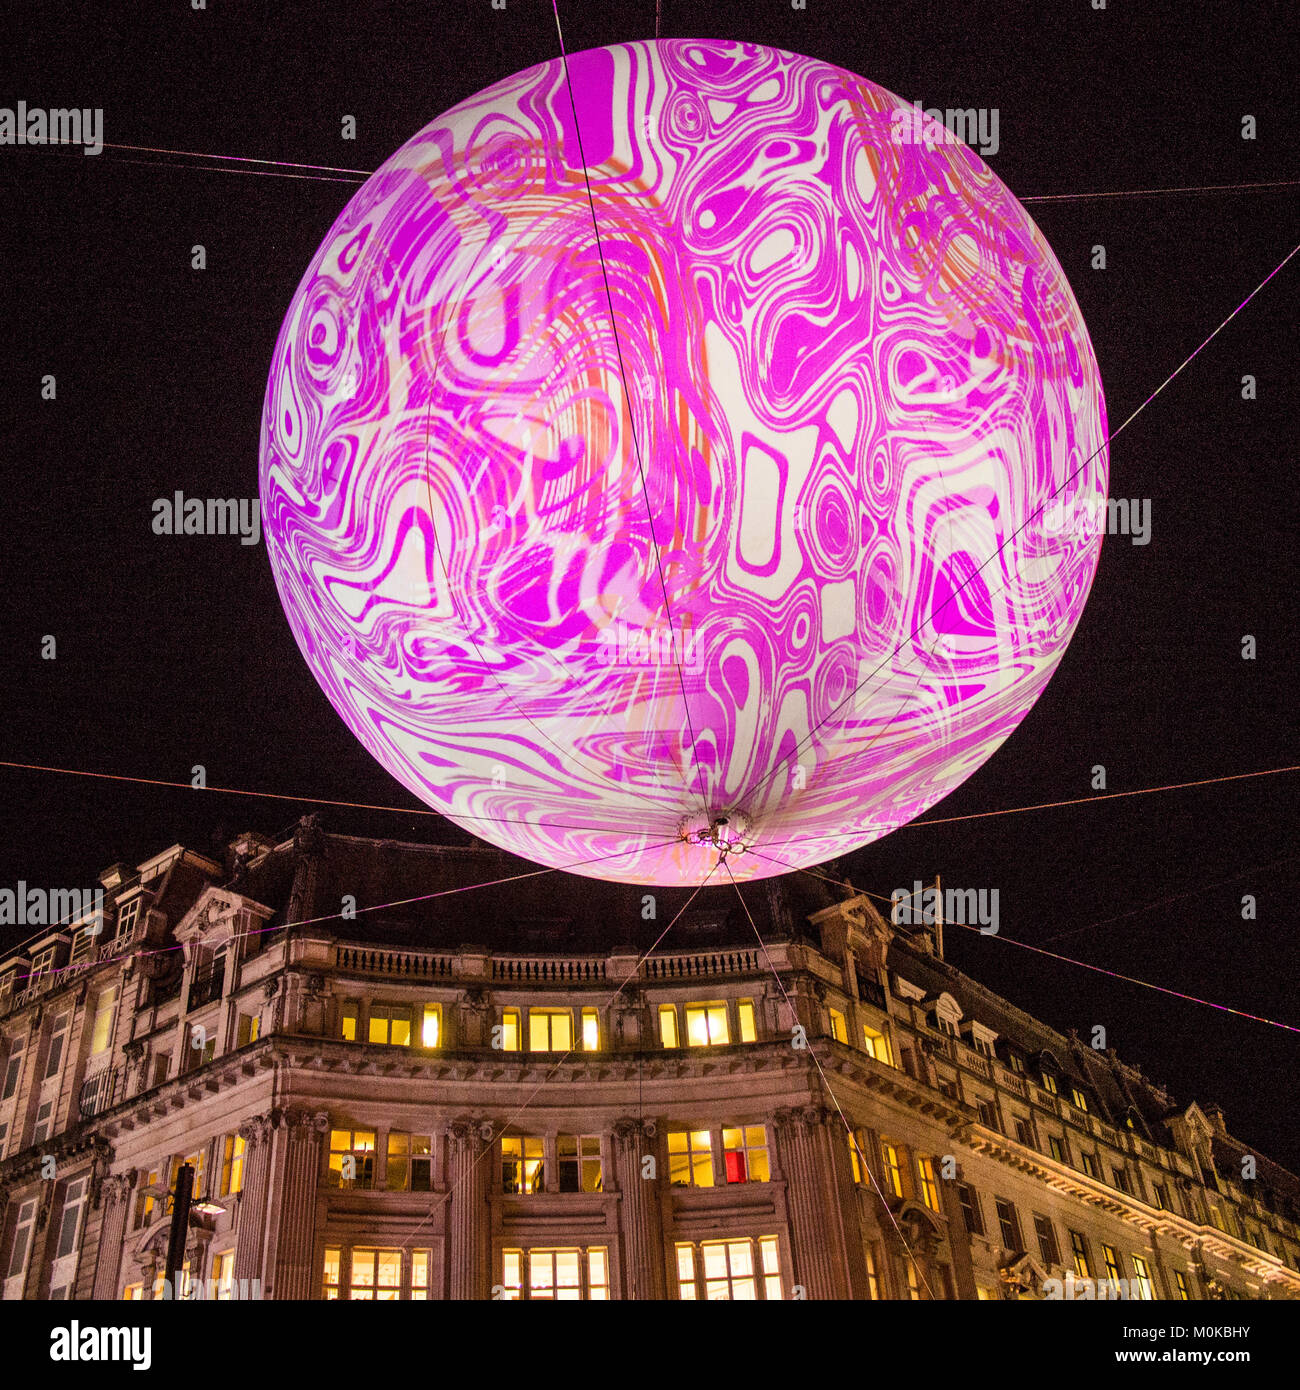 'Lumiere' Light Festival at Oxford Circus, London. Stock Photo